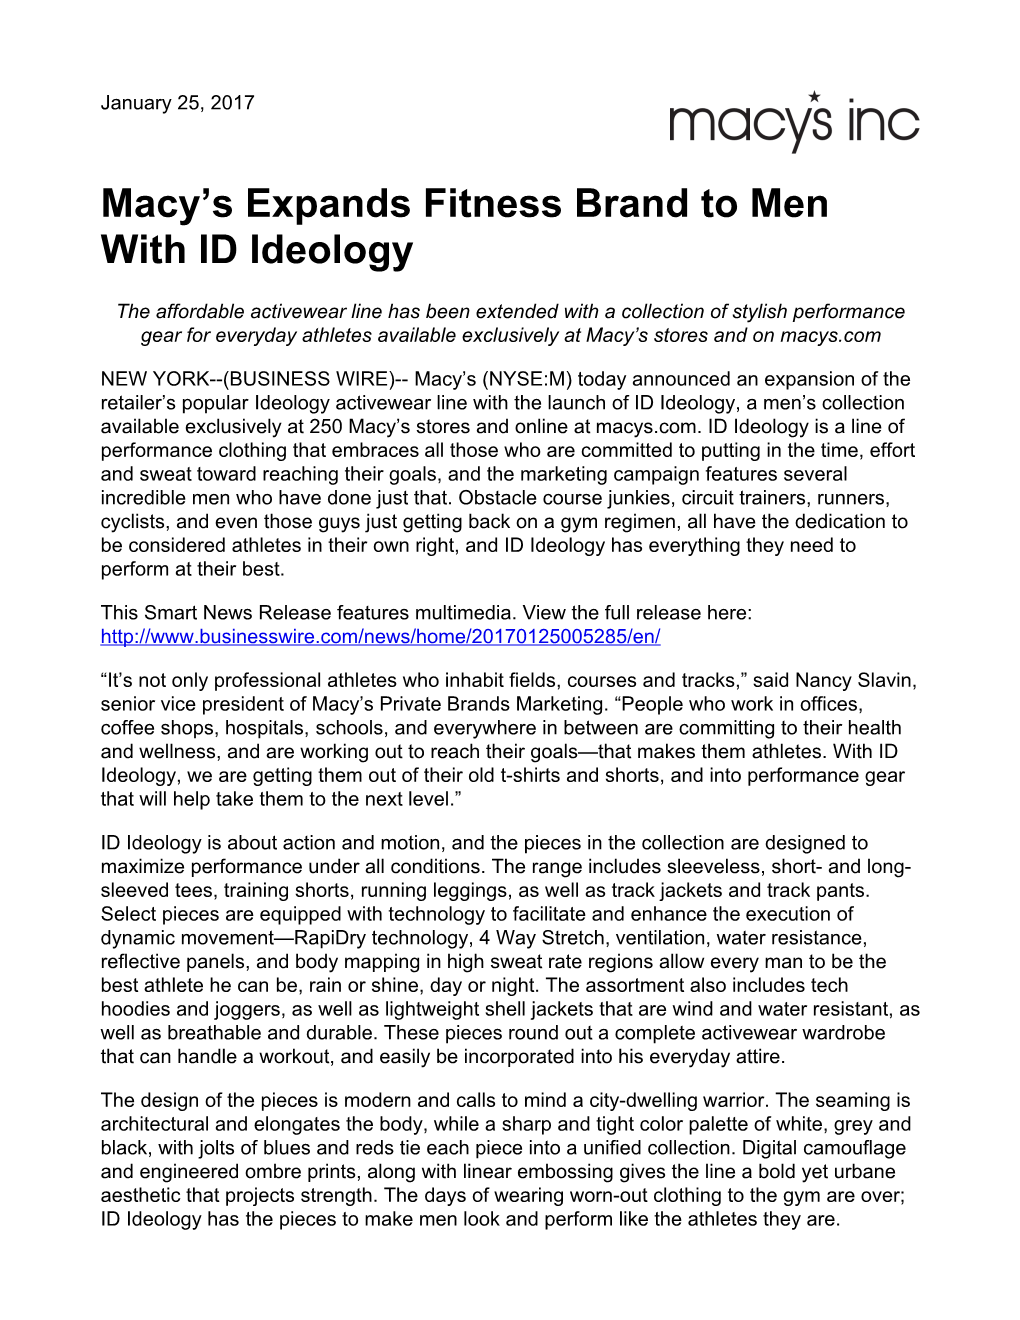 Macy's Expands Fitness Brand to Men with ID Ideology